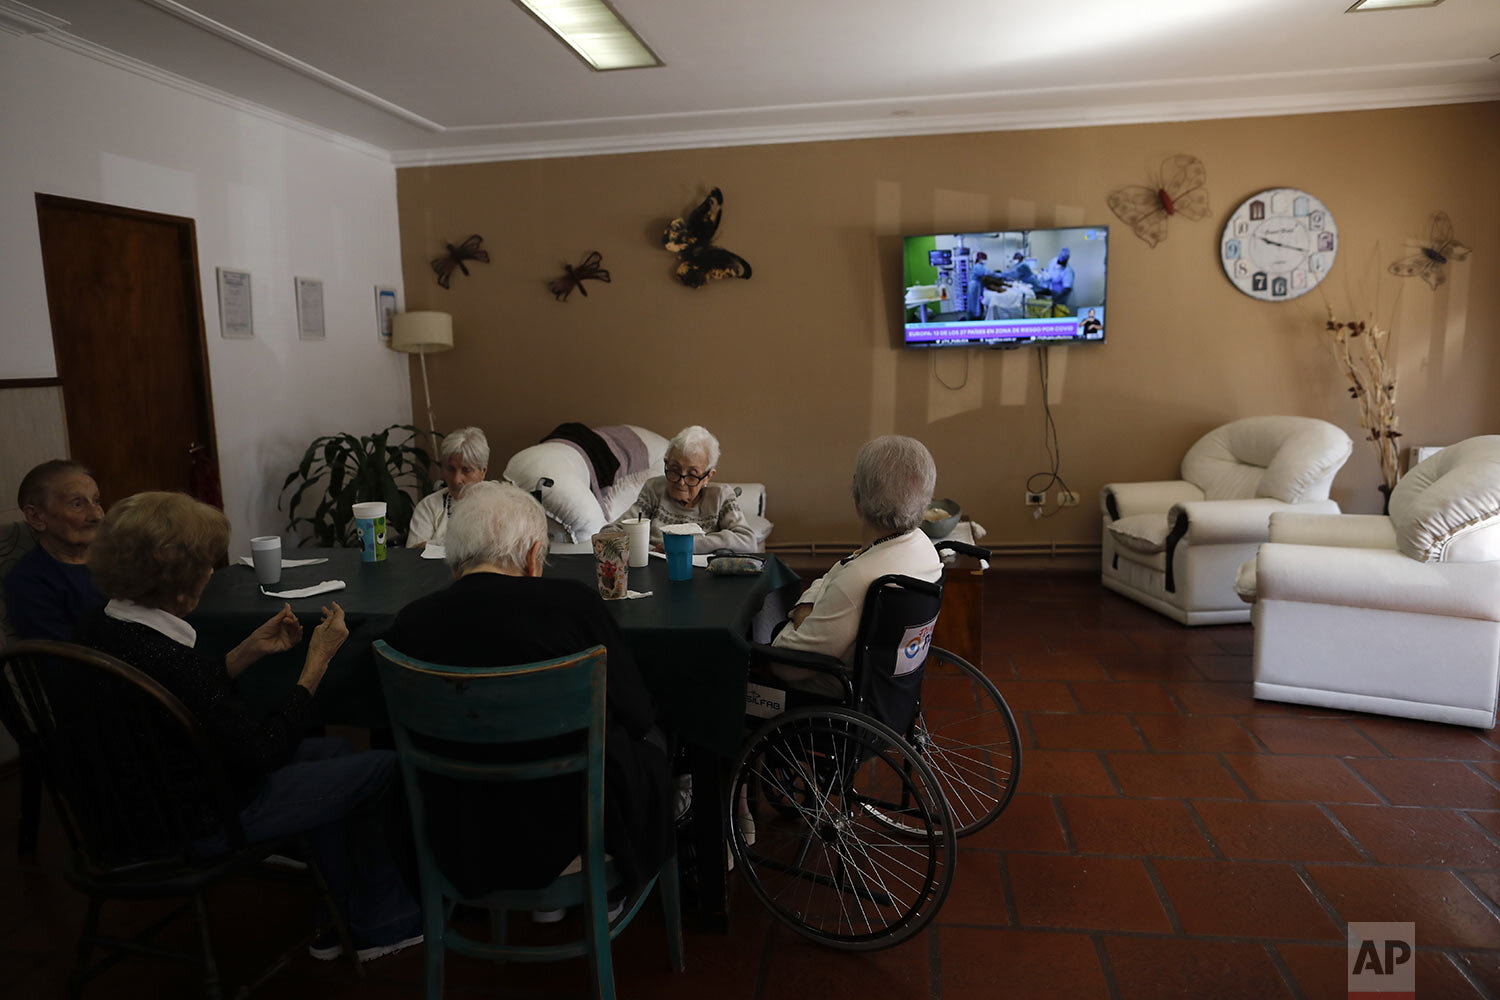  Women sit together at the Reminiscencias residence for the elderly in Tandil, Argentina, Monday, April 5, 2021. (AP Photo/Natacha Pisarenko) 